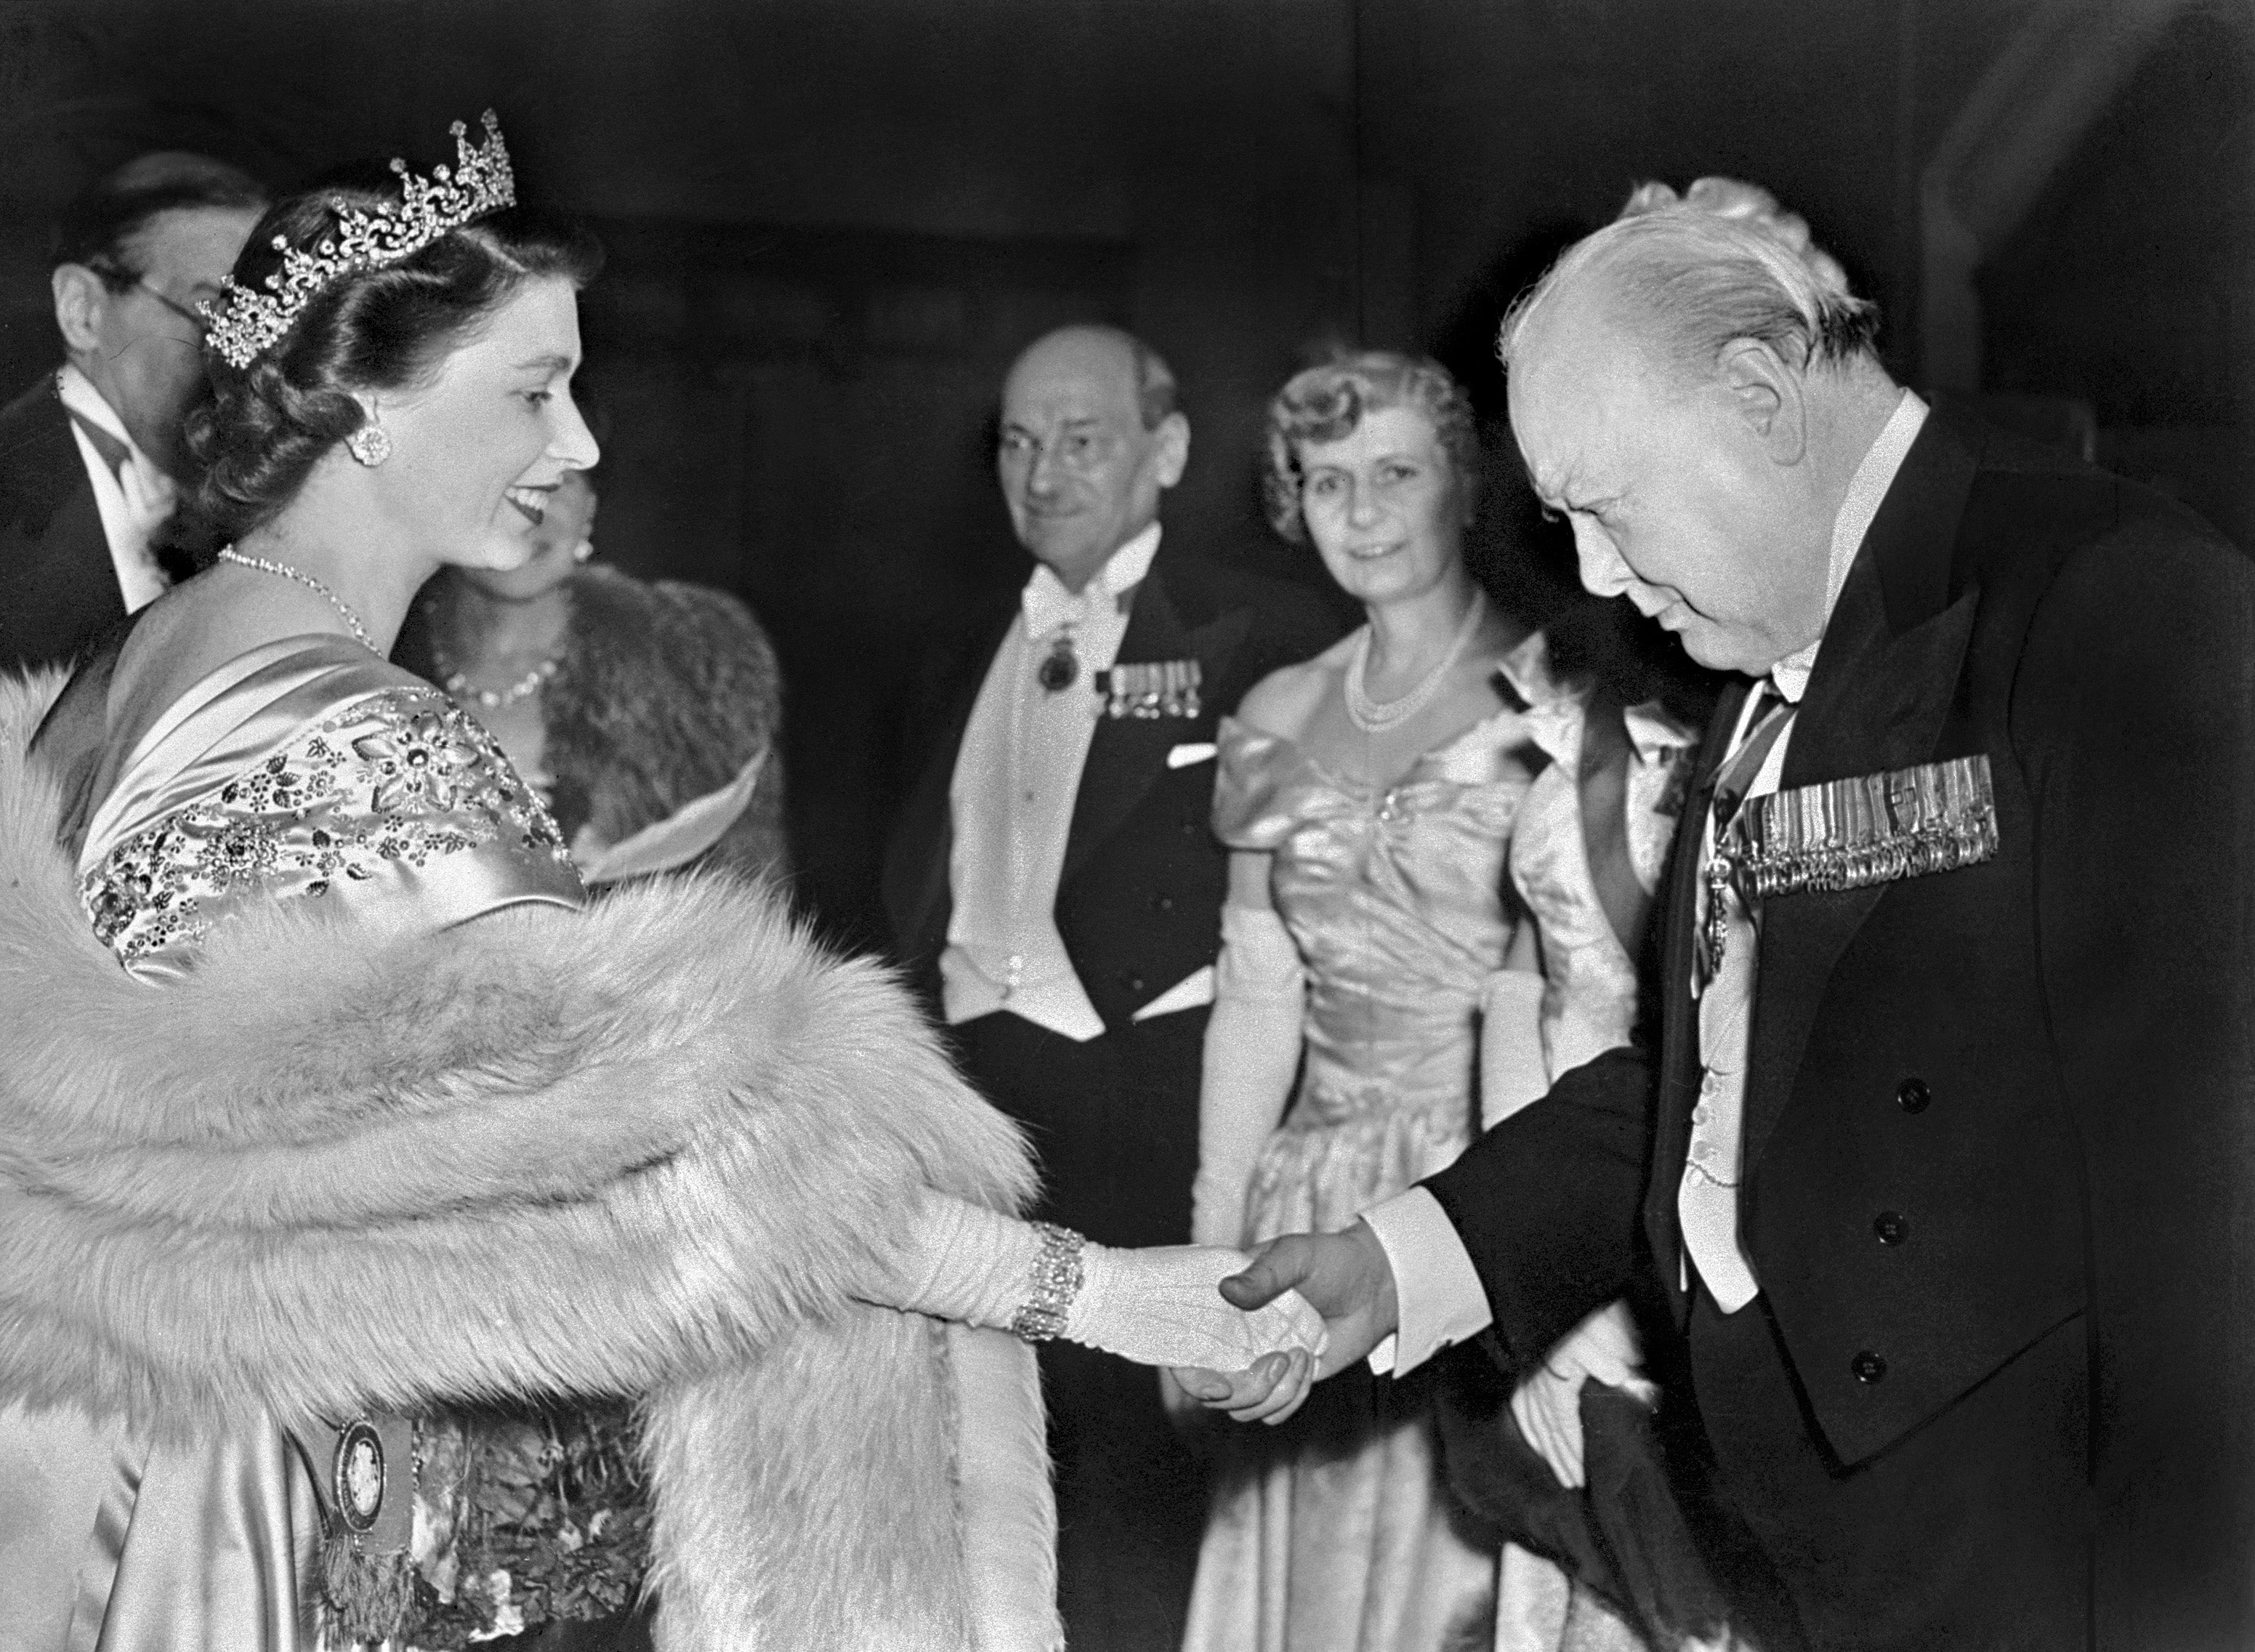 The Queen and Winston Churchill in 1950